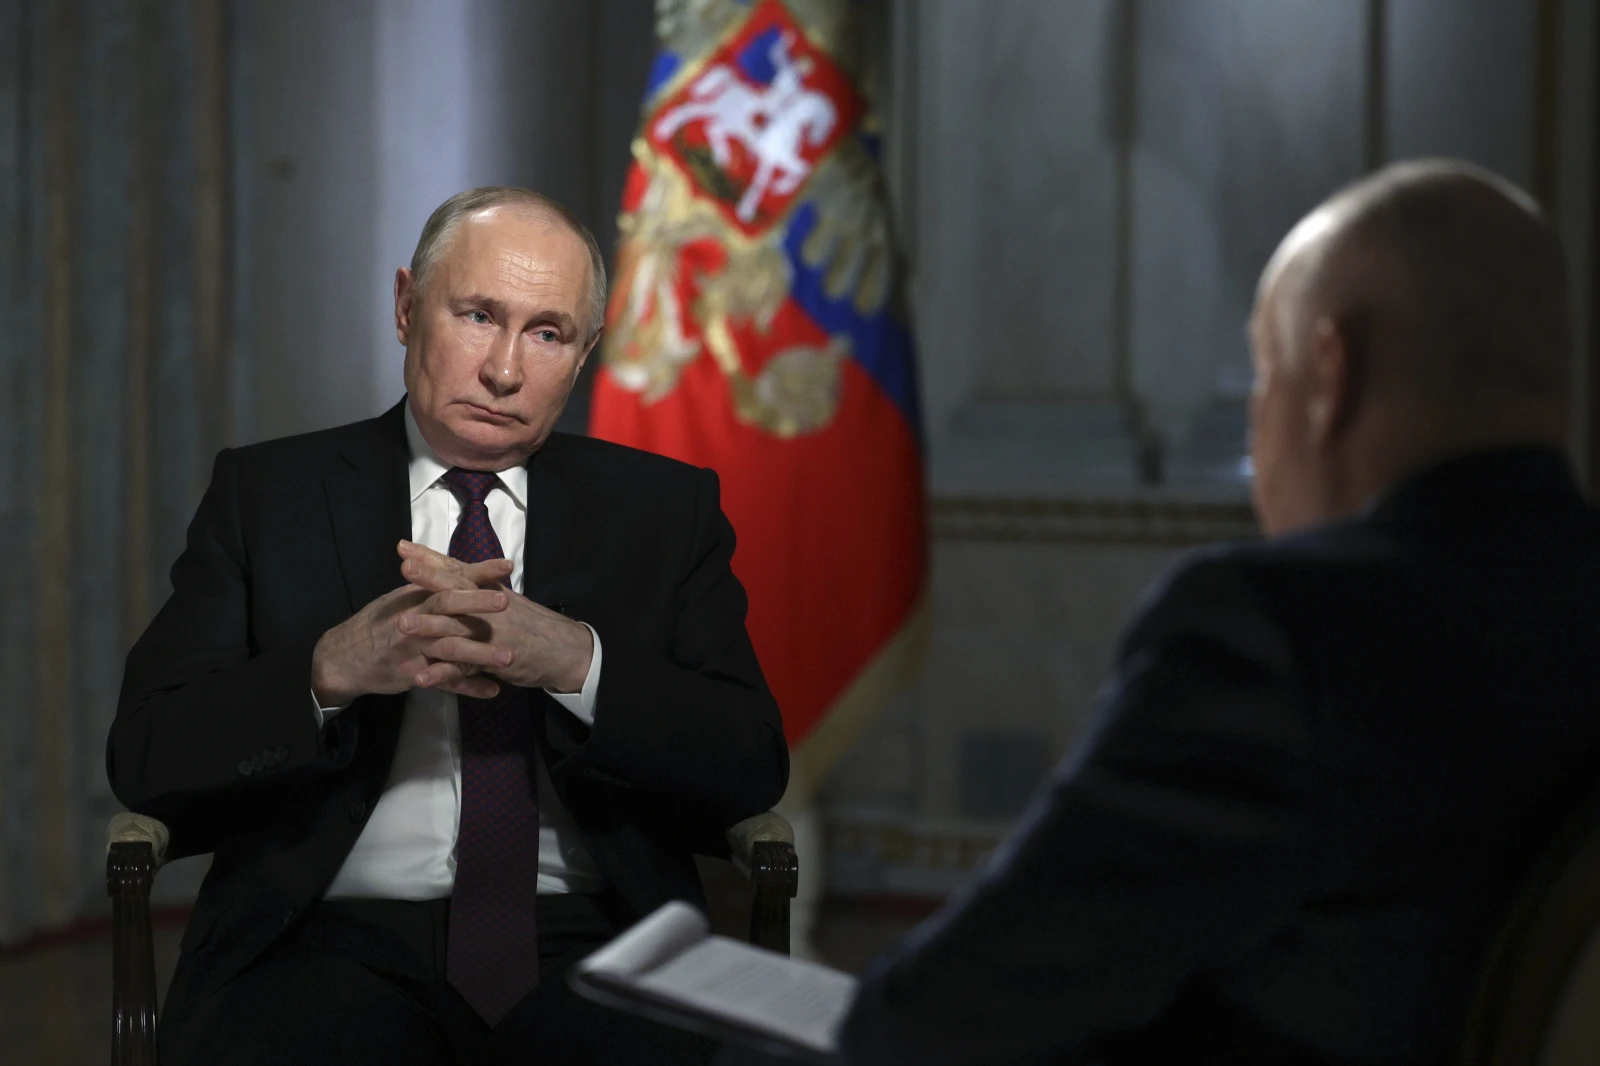 Putin Warns Again That Russia Is Ready to Use Nuclear Weapons If Its Sovereignty Is Threatened